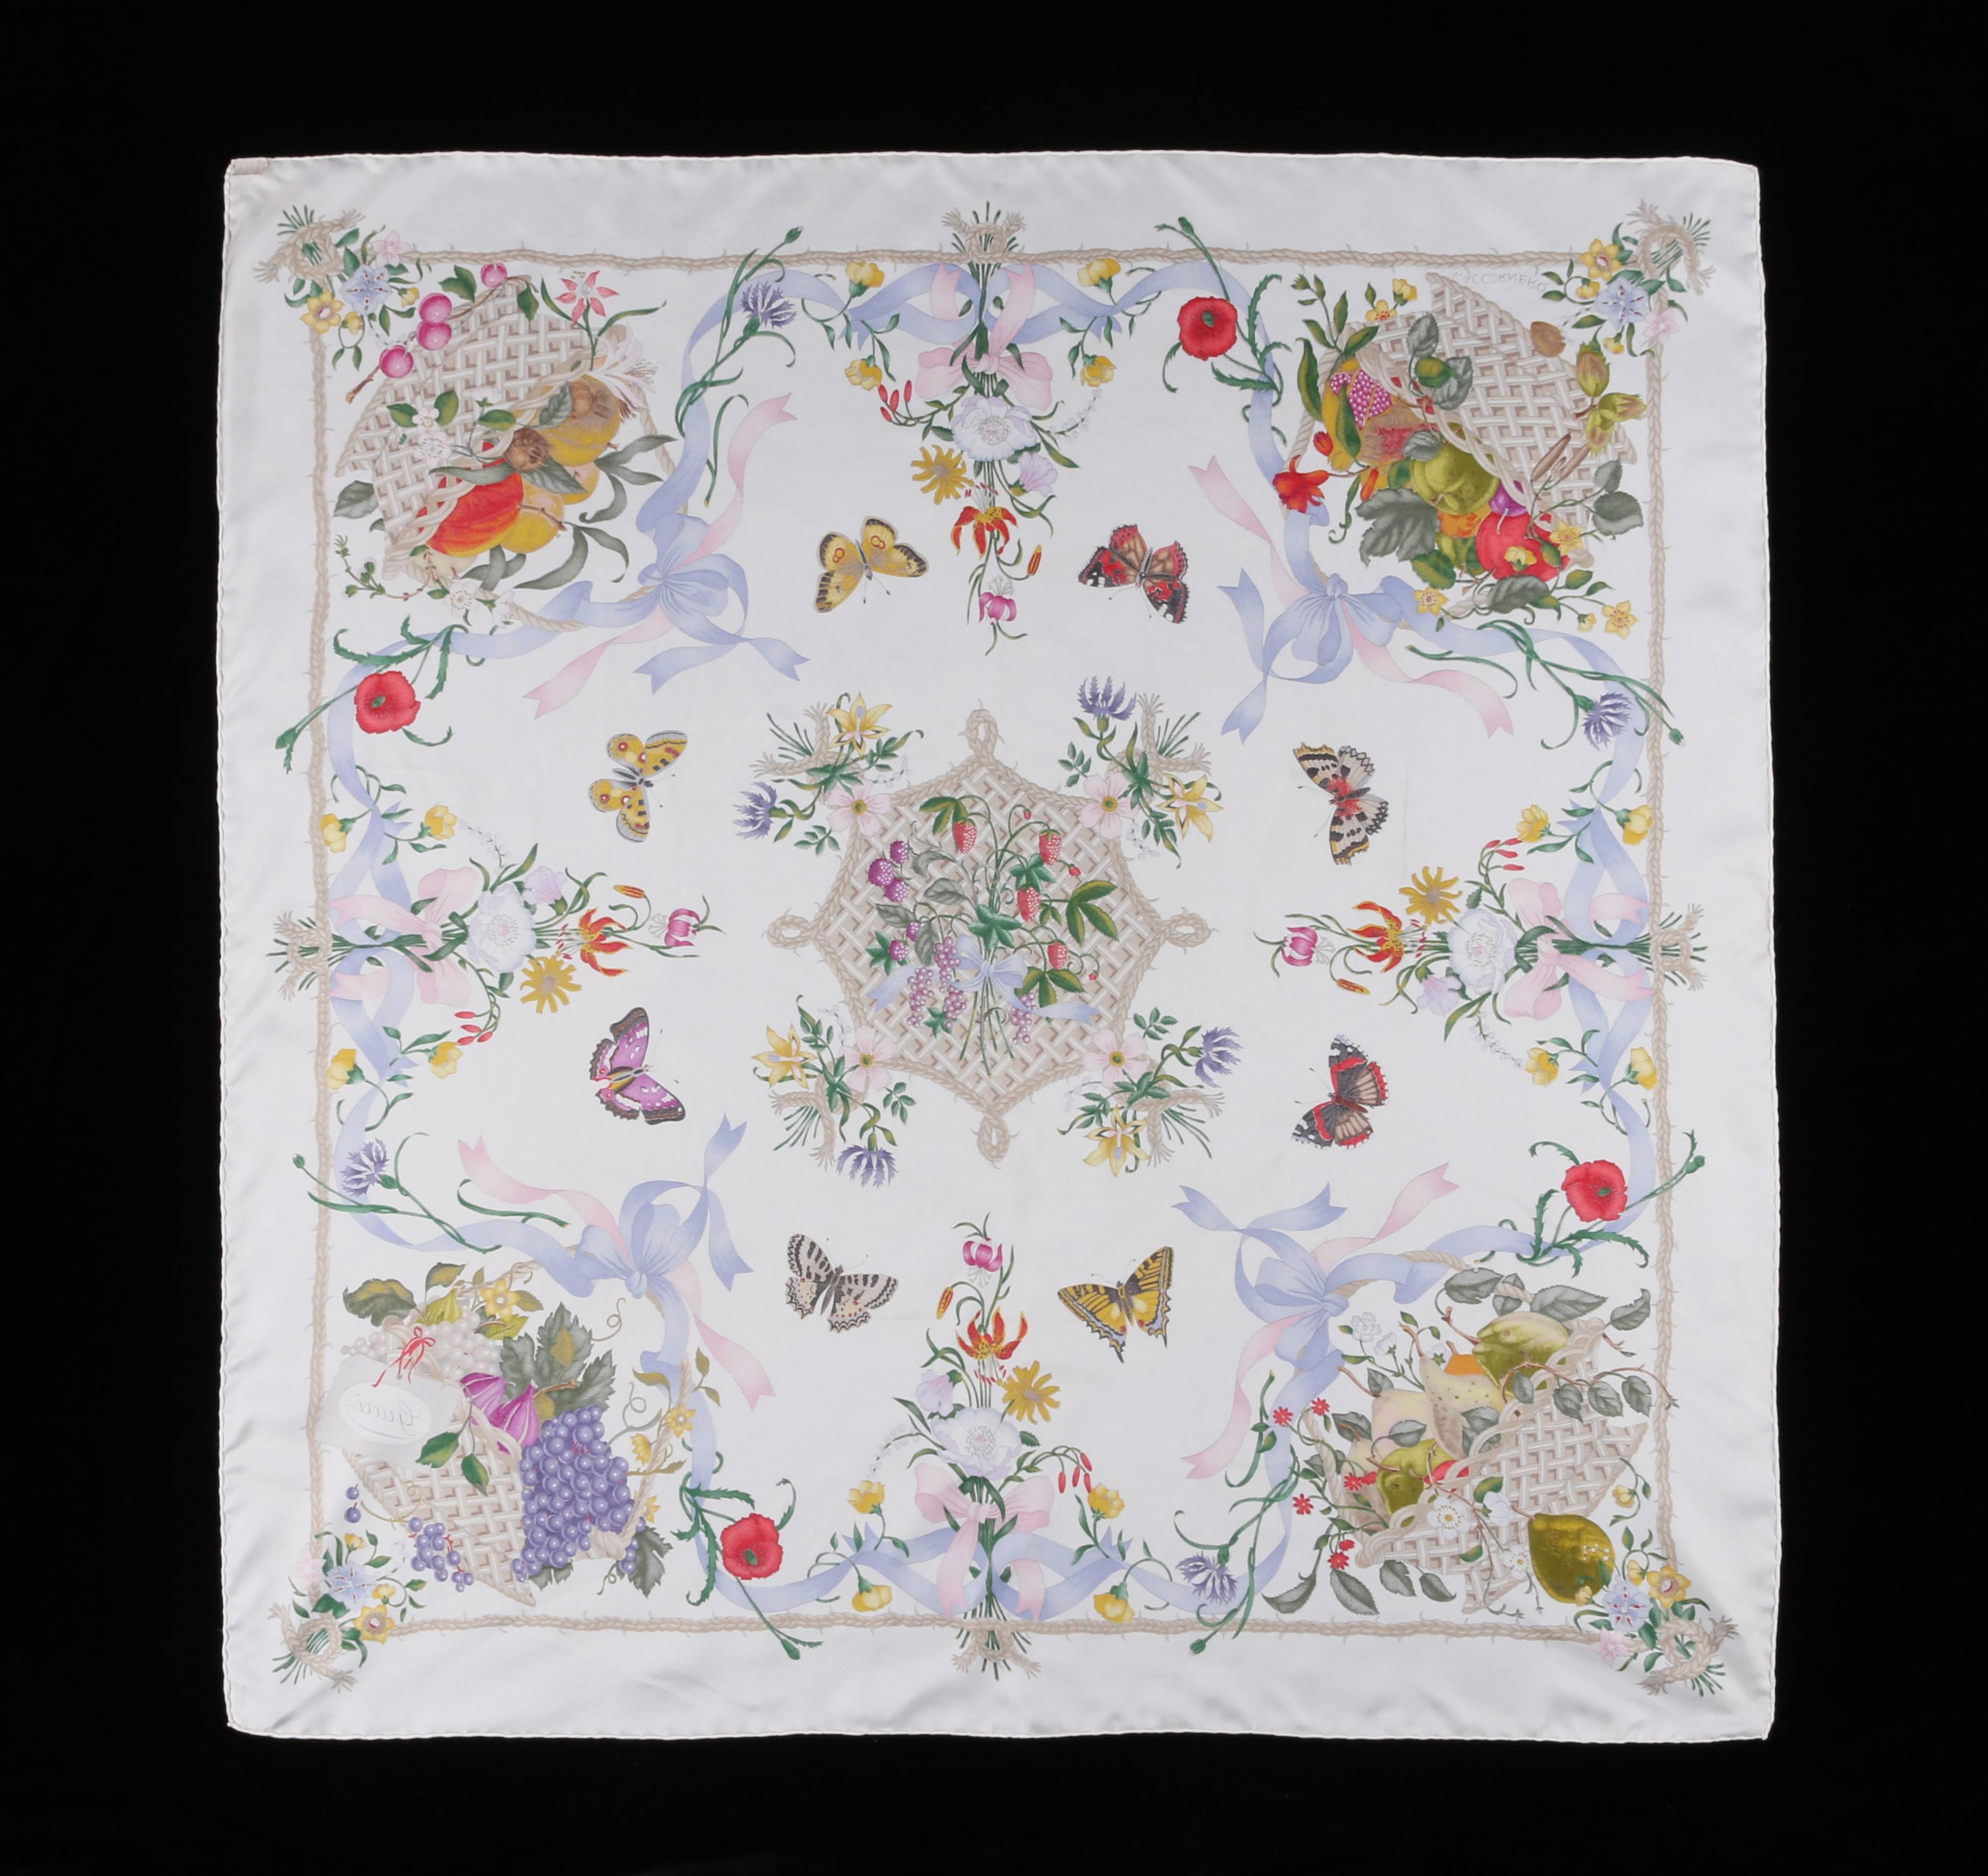 Gucci c.1970's multicolored floral butterfly fruit print silk scarf designed by Viittorio Accornero. Ivory background with beige rope border and multicolored symmetrical floral, fruit, and butterfly design. Hand rolled edges. 